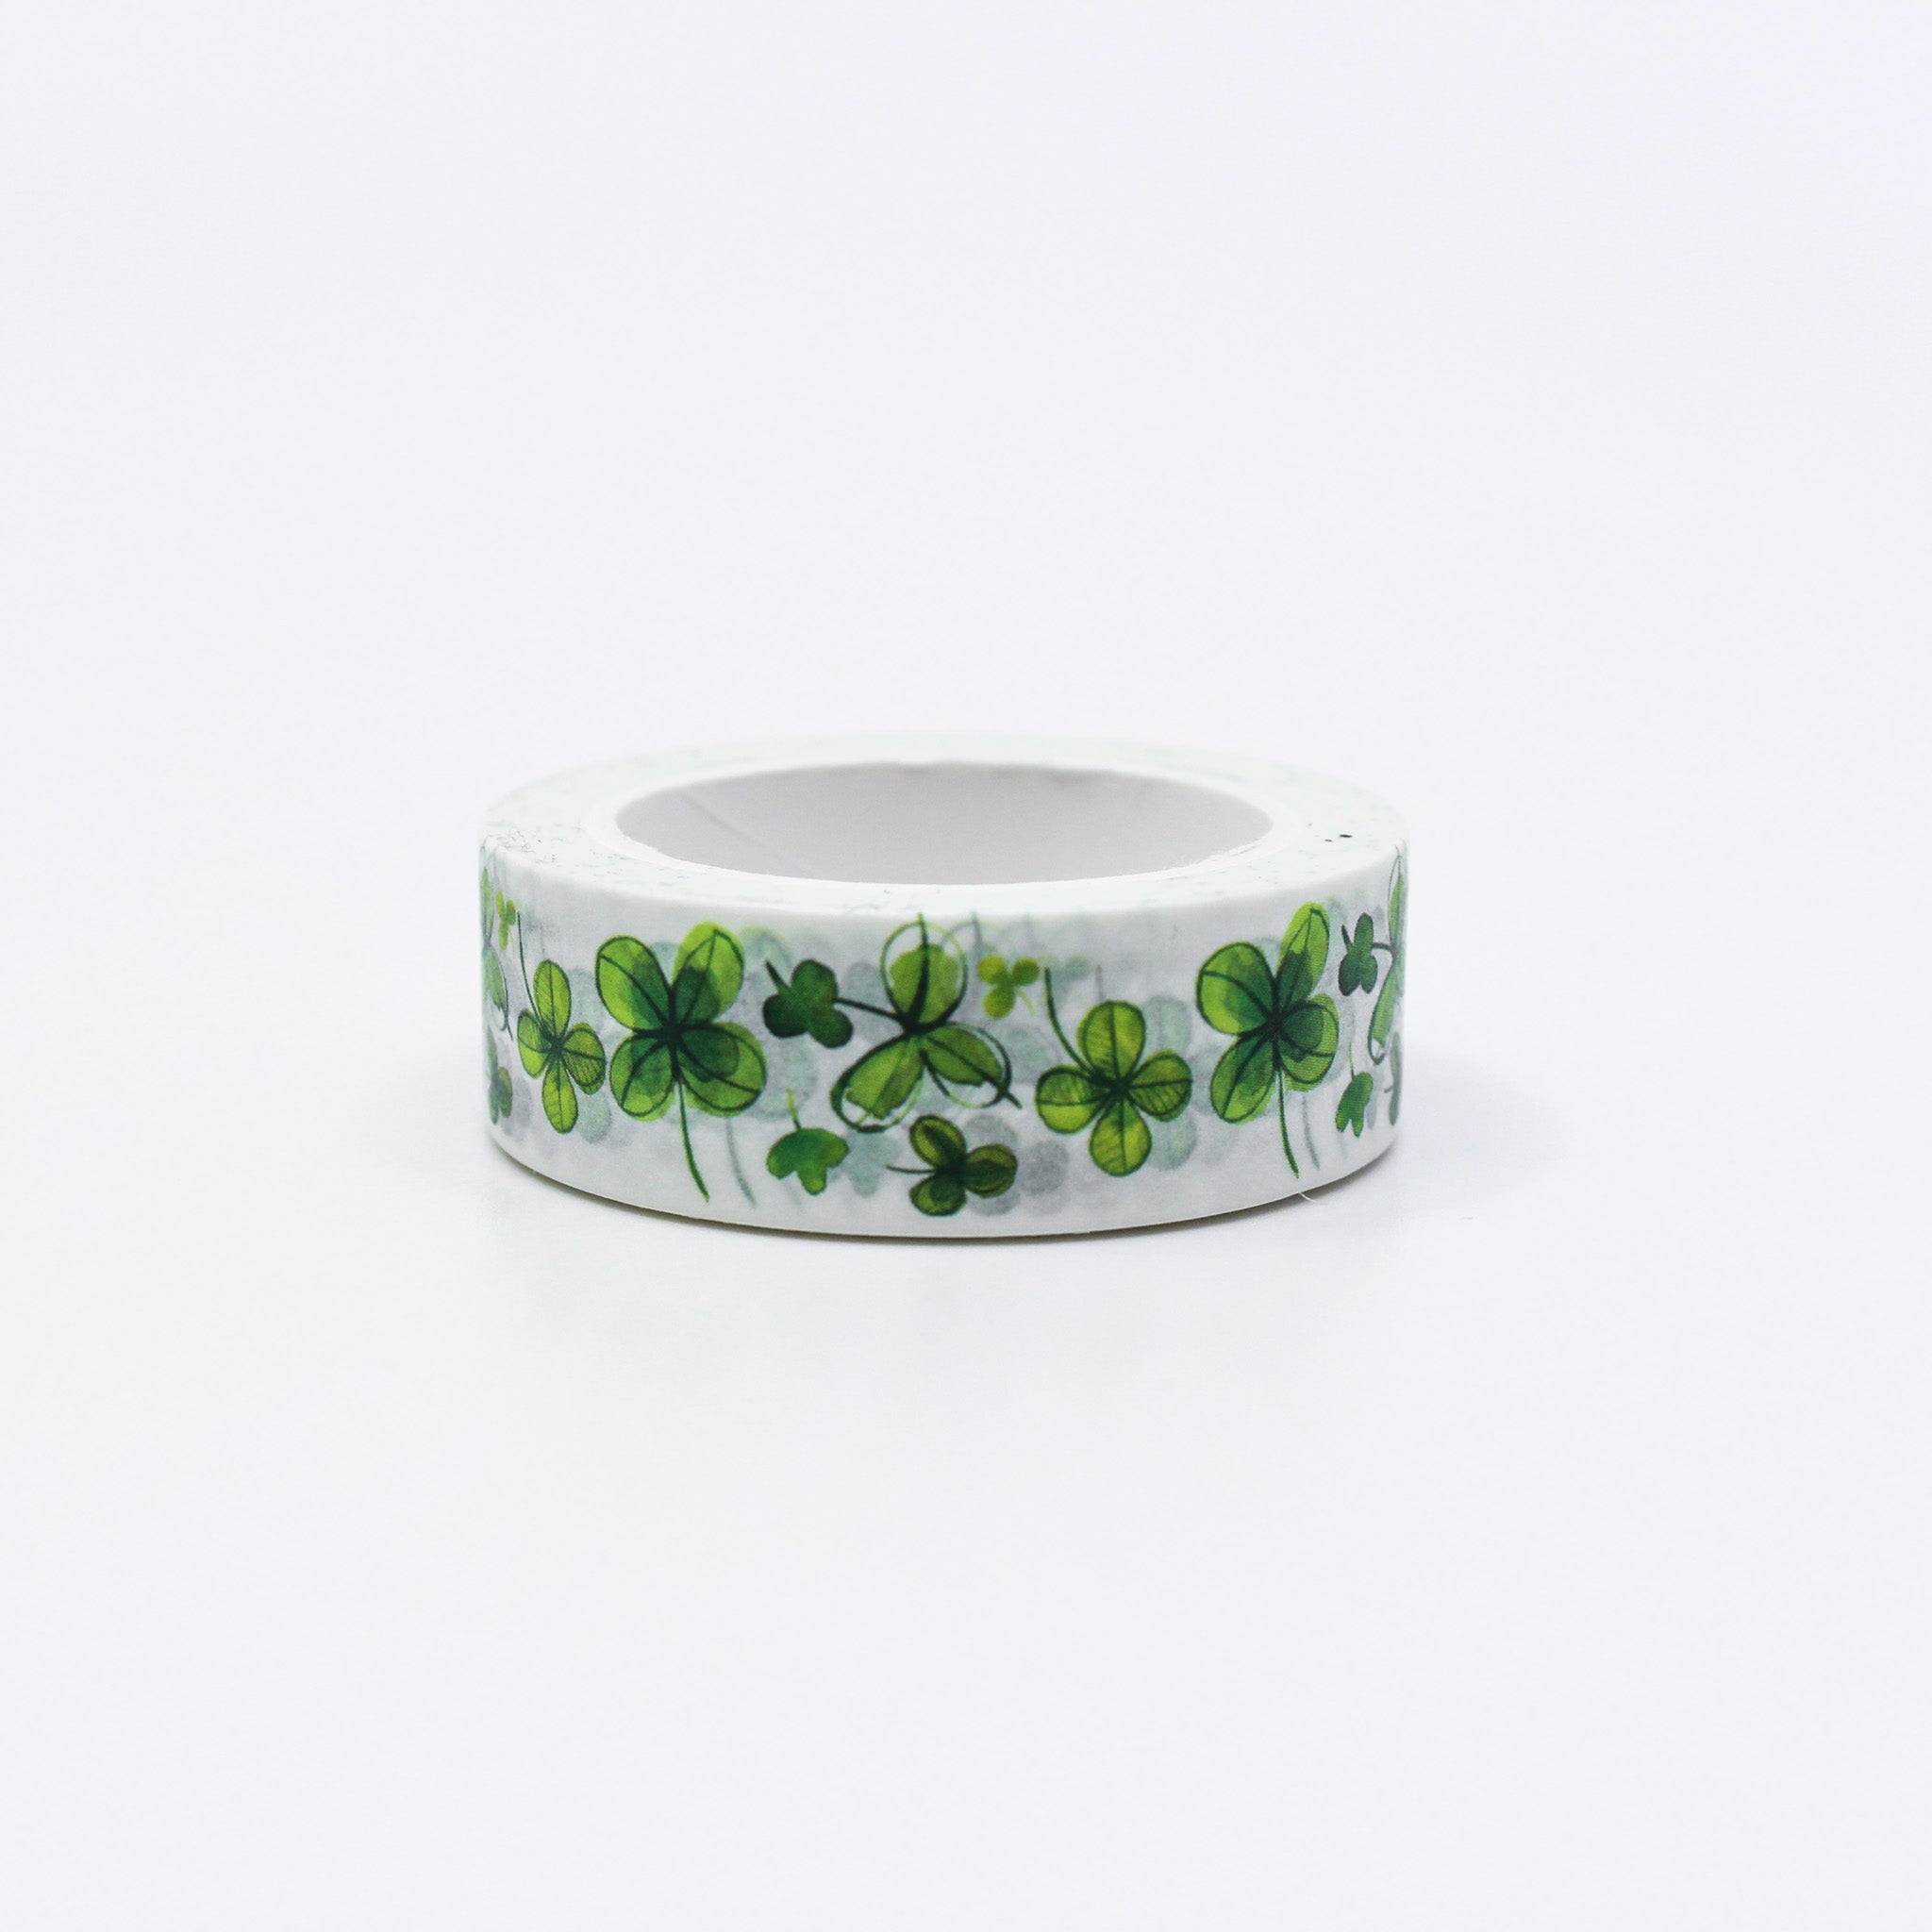 This is a green shamrocks clover pattern washi tape from BBB Supplies Craft Shop